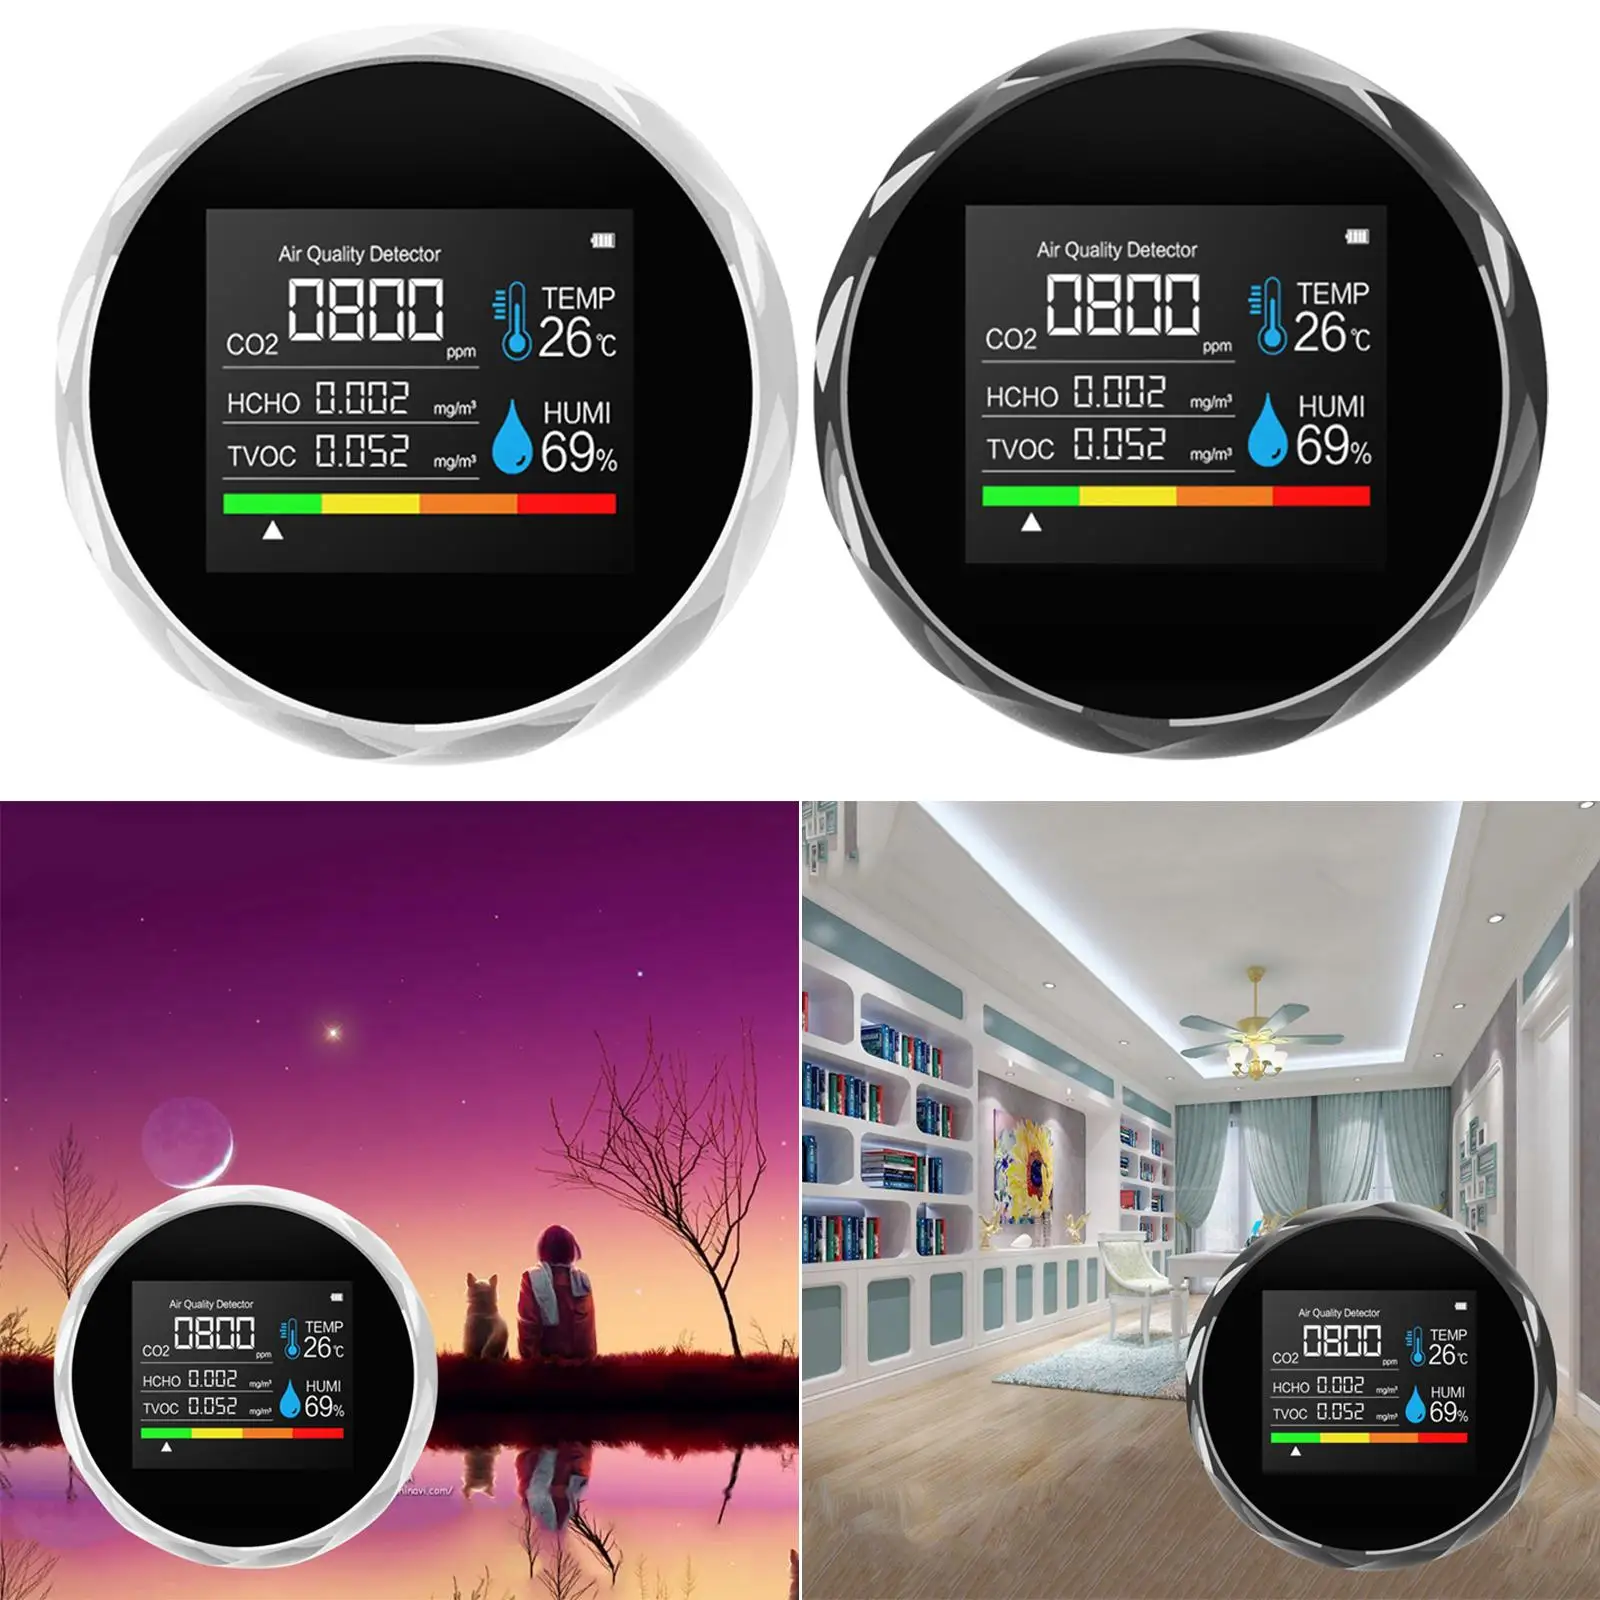 Air Quality Monitor Indoor, , Air Pollution Carbon Dioxide Temperature, Humidity 